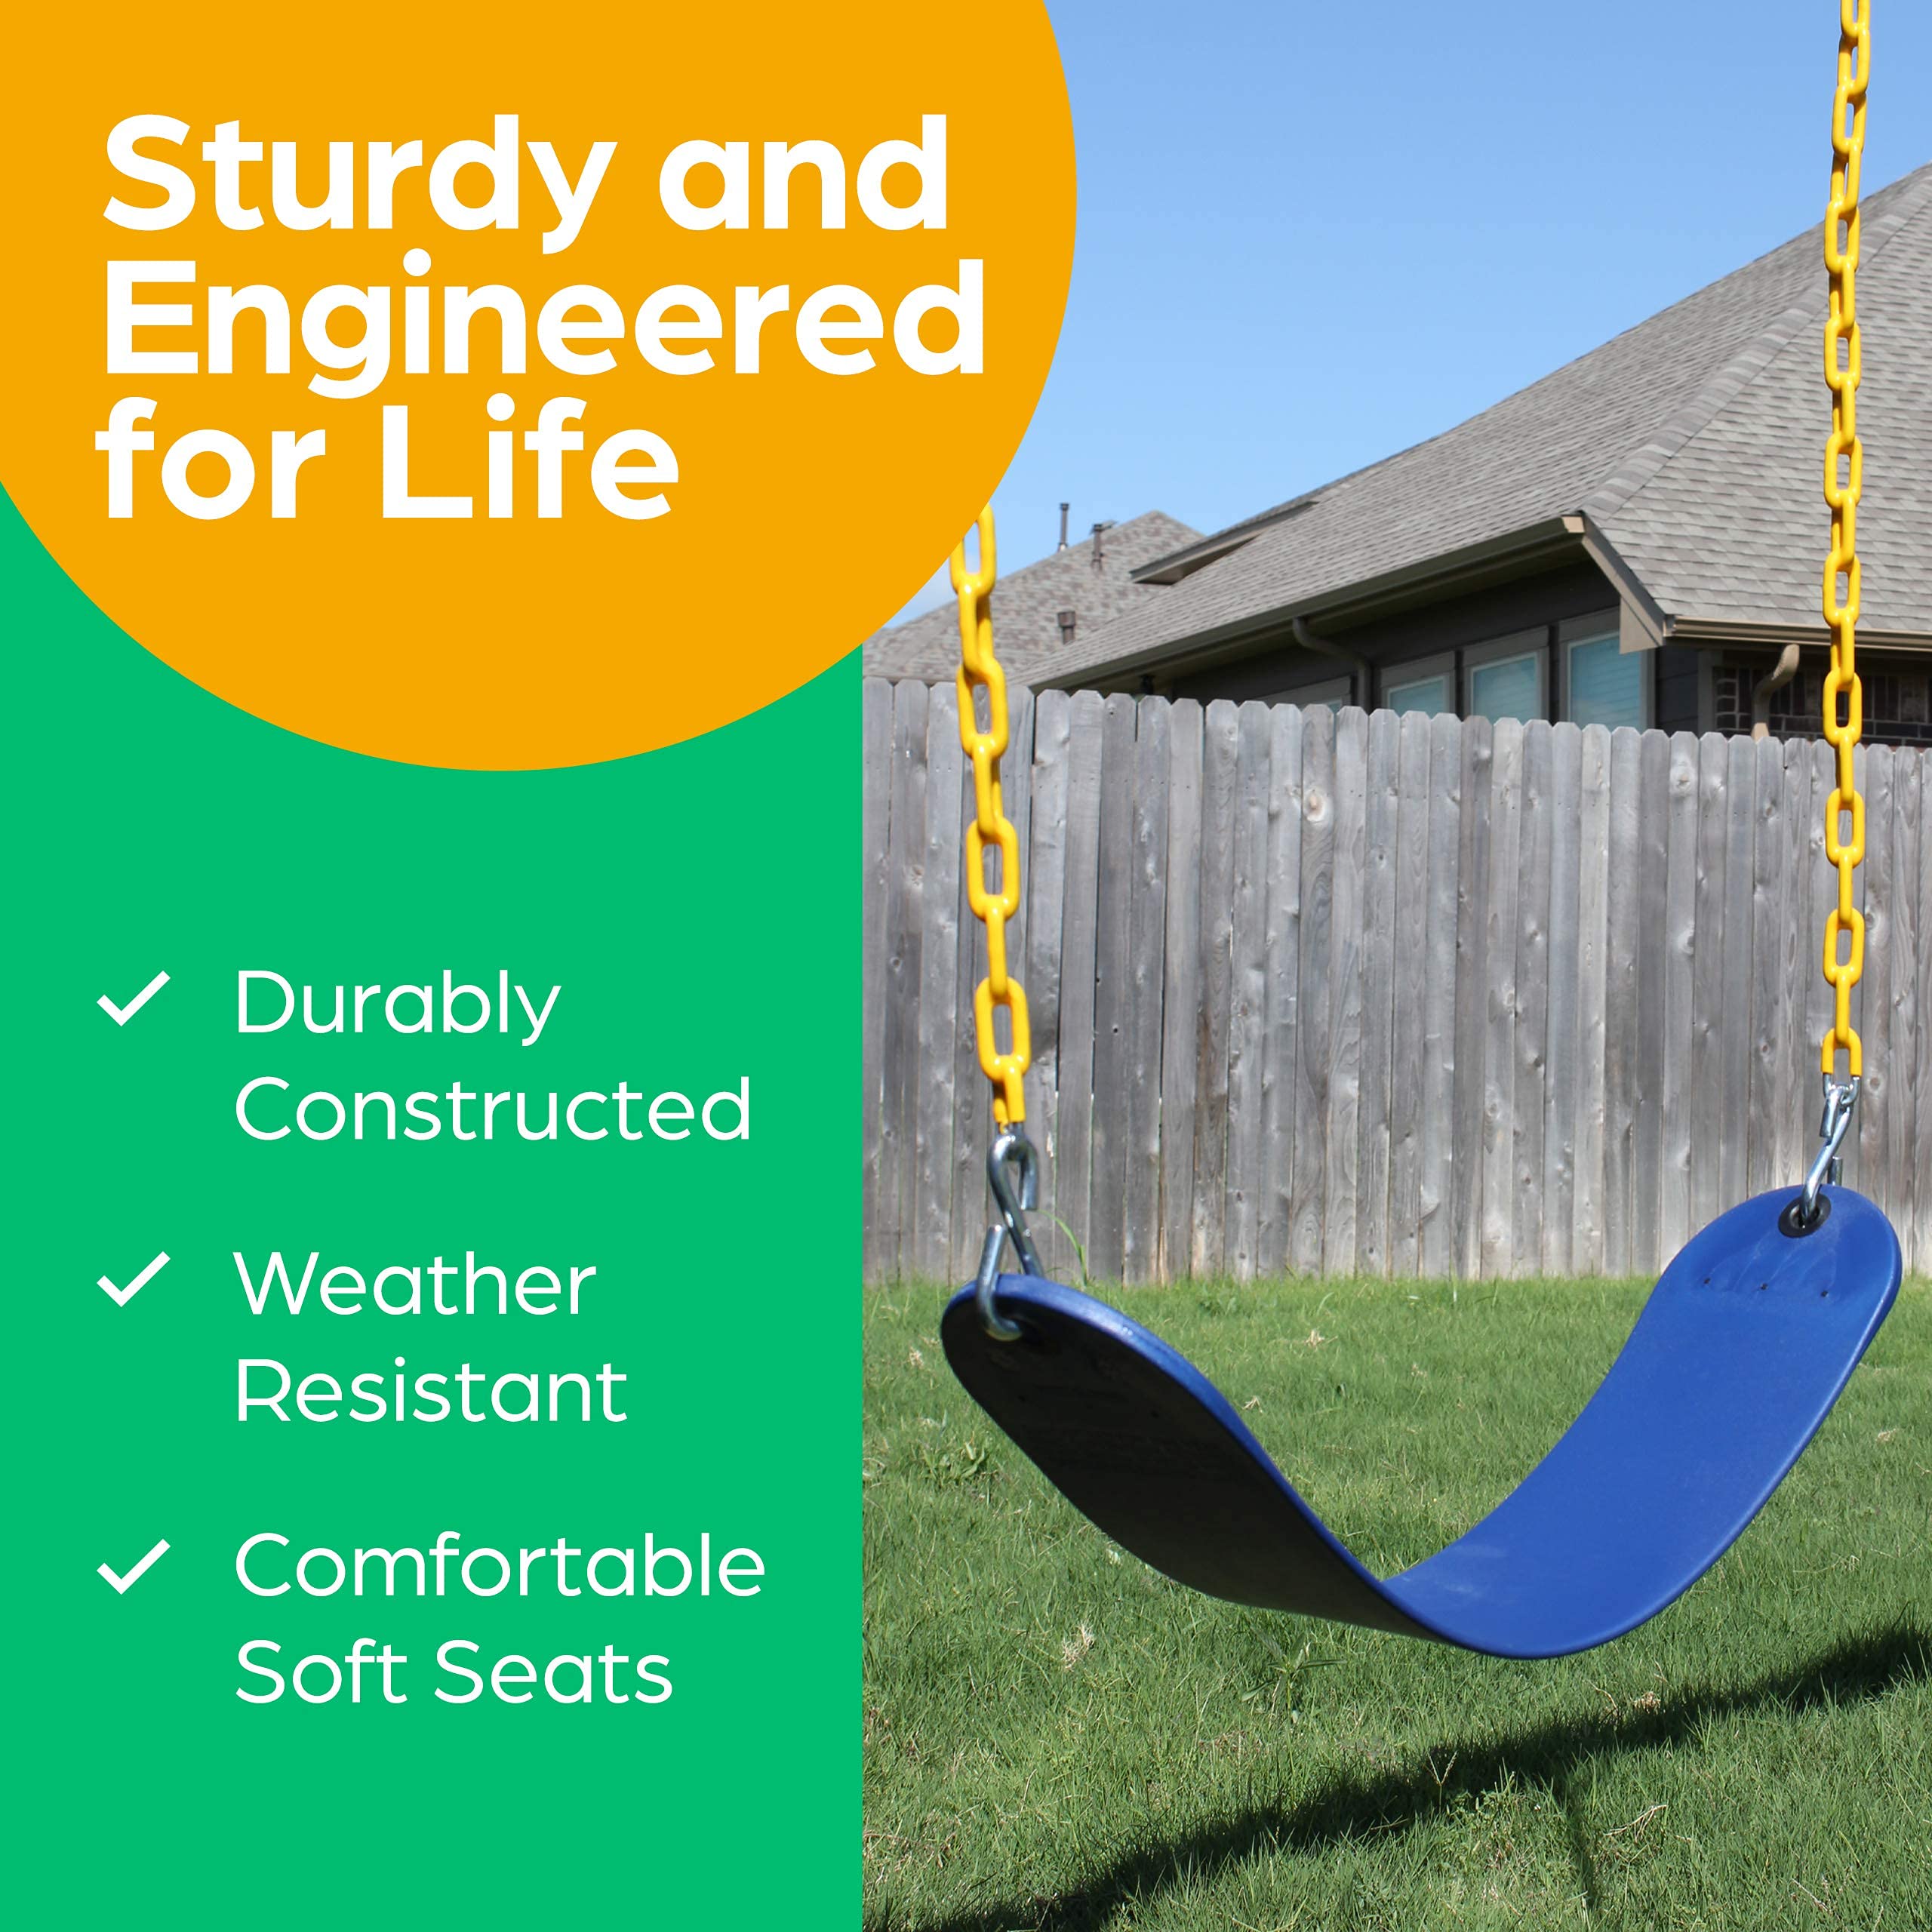 Jungle Gym Kingdom Swing for Outdoor Swing Set - Pack of 1 Swing Seat Replacement Kit with Heavy Duty Chains - Backyard Swingset